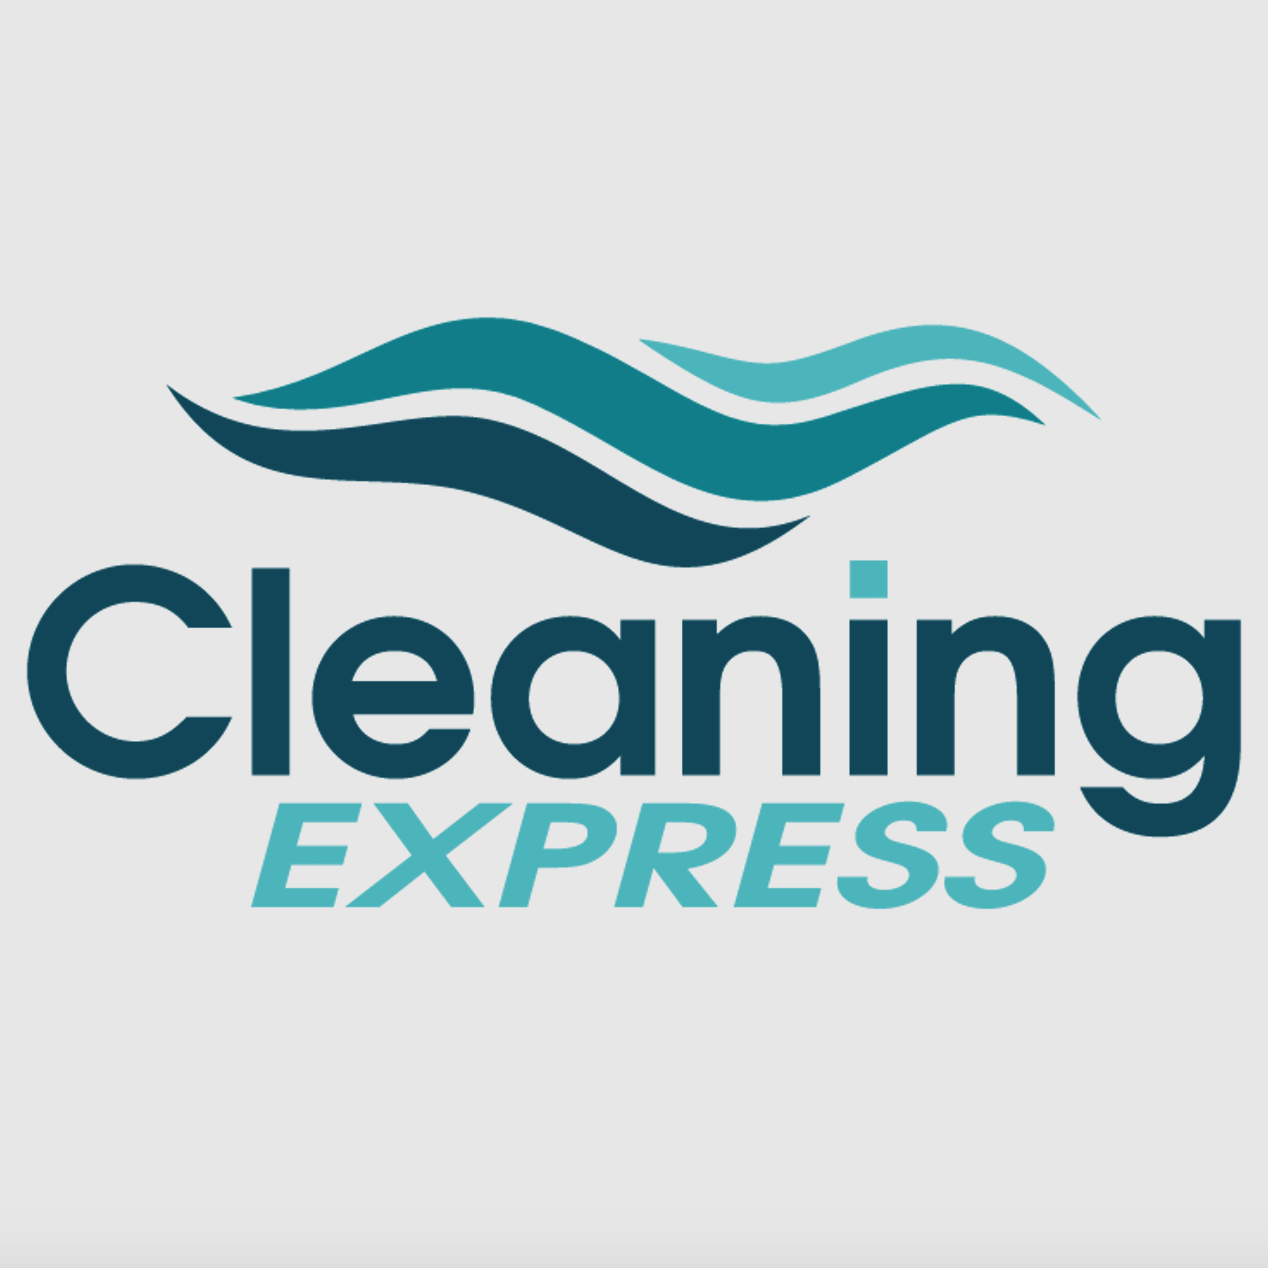 Cleaning Express